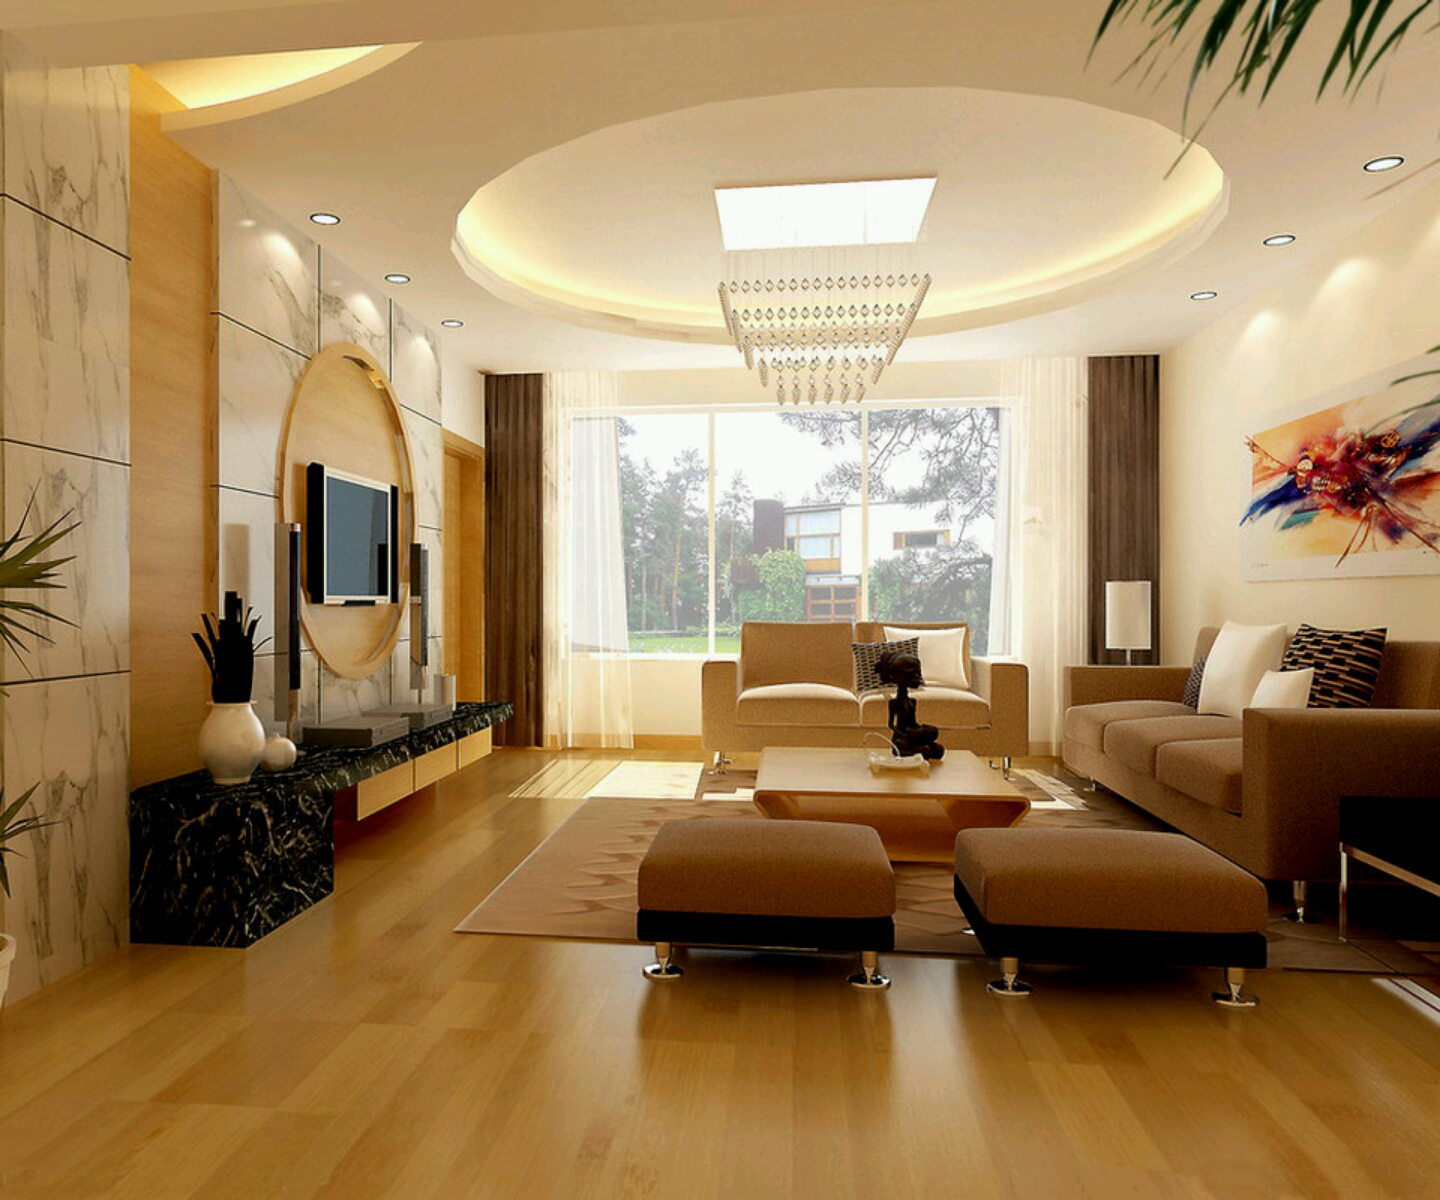 Modern interior decoration living rooms ceiling designs ideas.  New home des